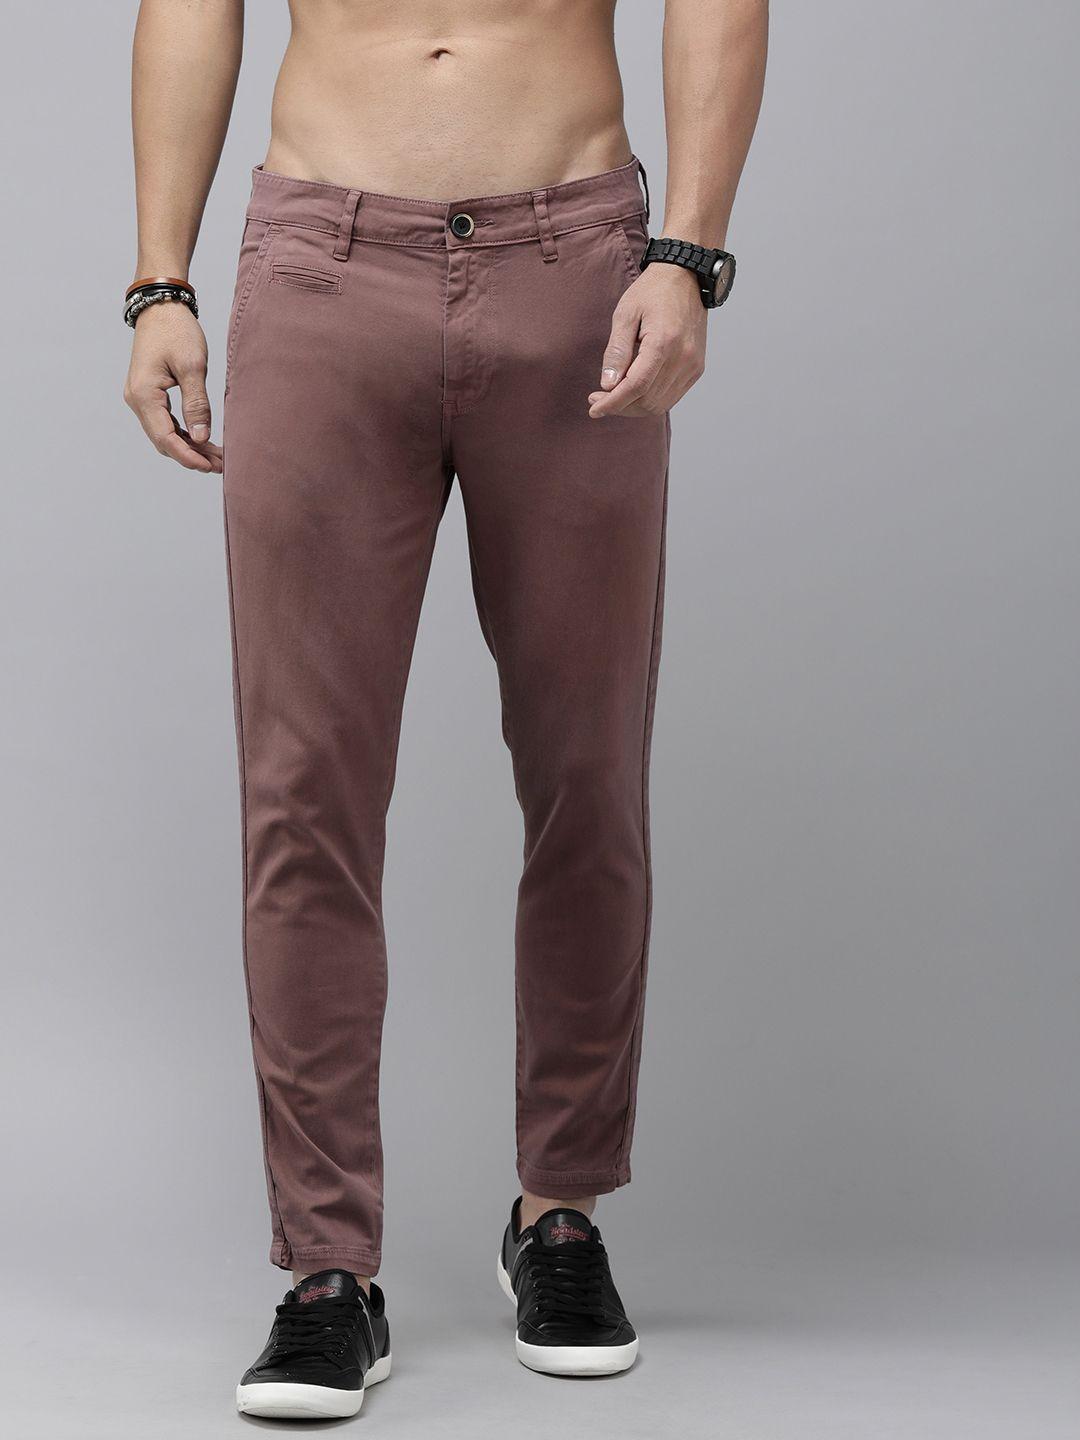 the roadster lifestyle co. men slim fit low-rise trousers